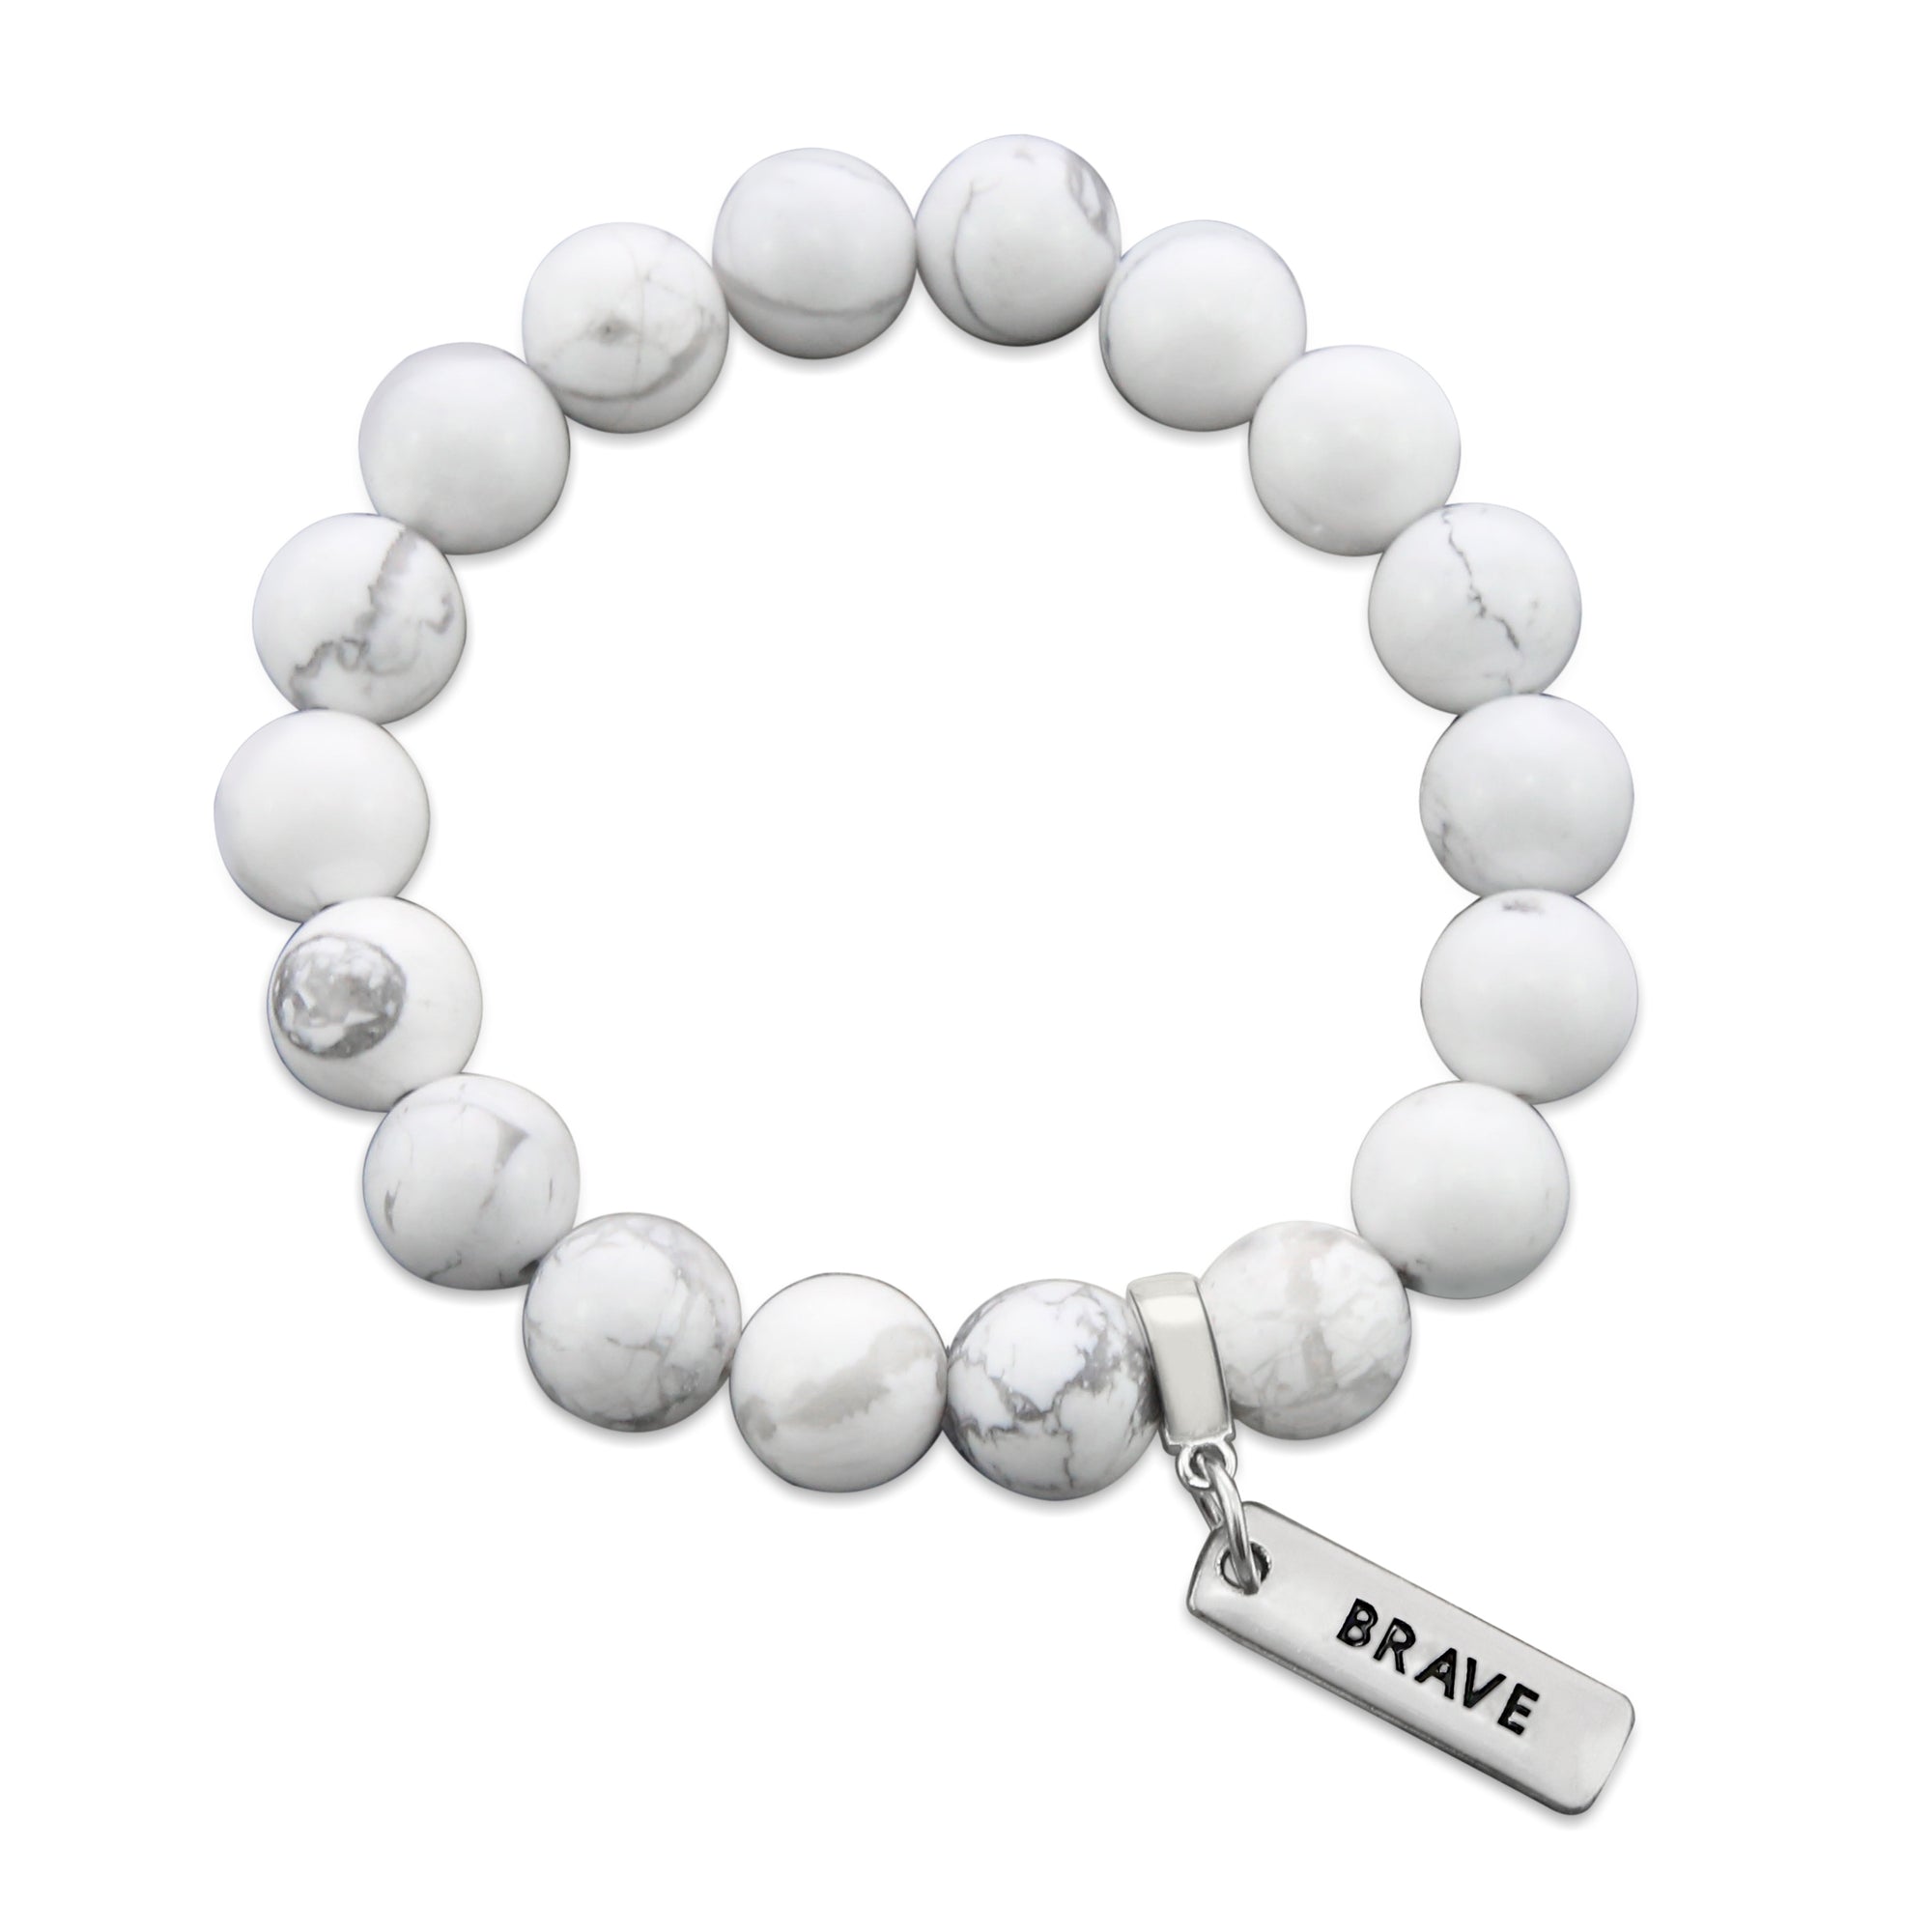 White marble howlite stone bead bracelet with silver word charm.